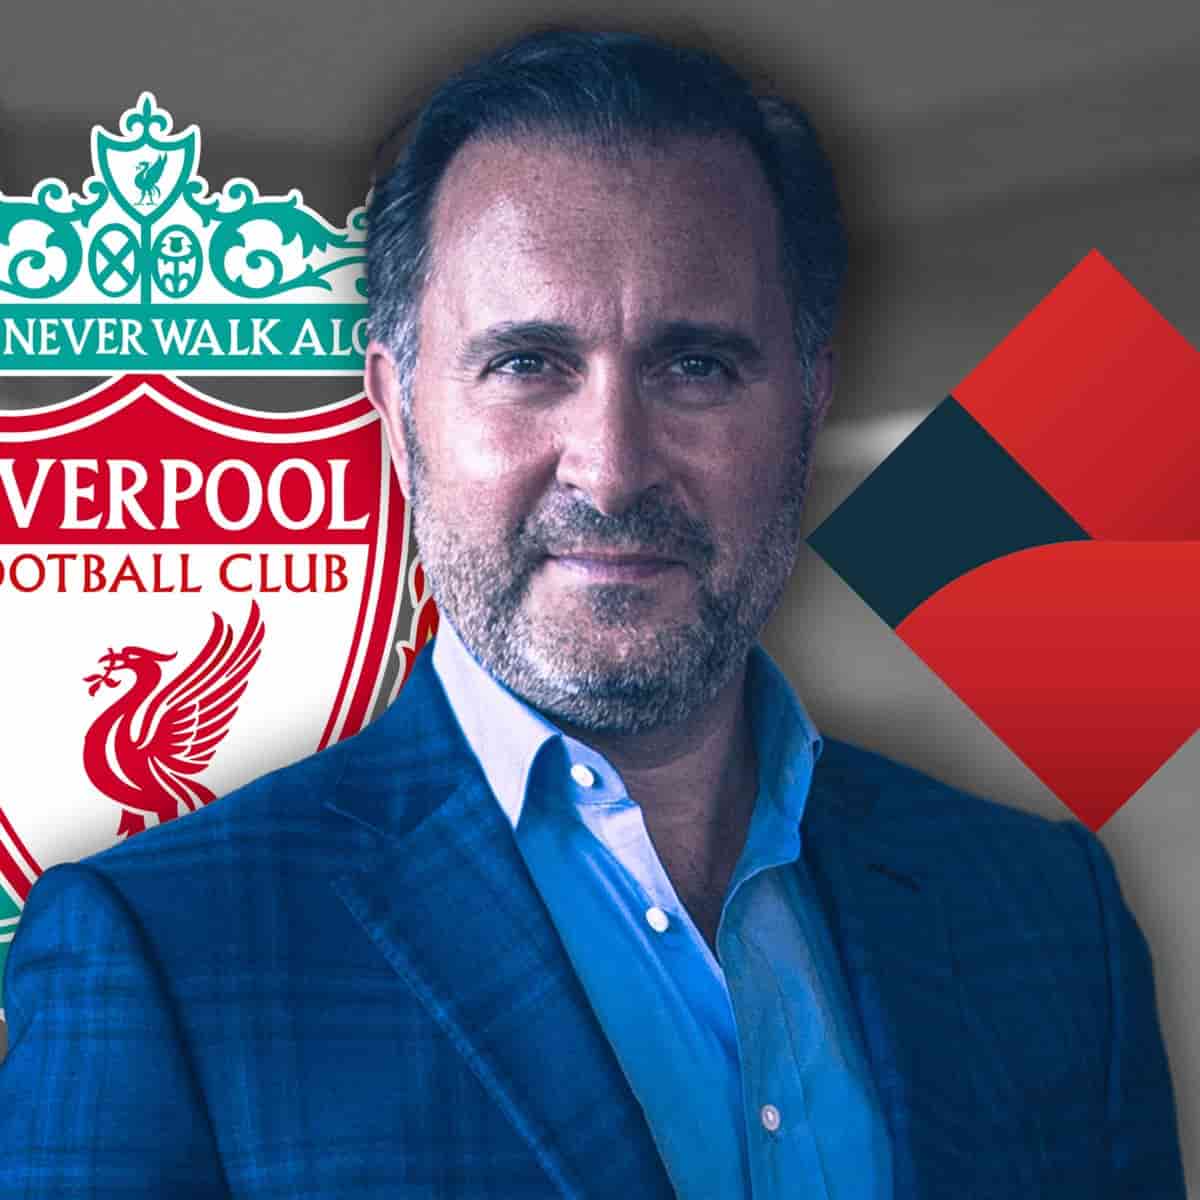 Controversy for Liverpool investors as Redbird’s £1bn takeover of AC Milan in doubt